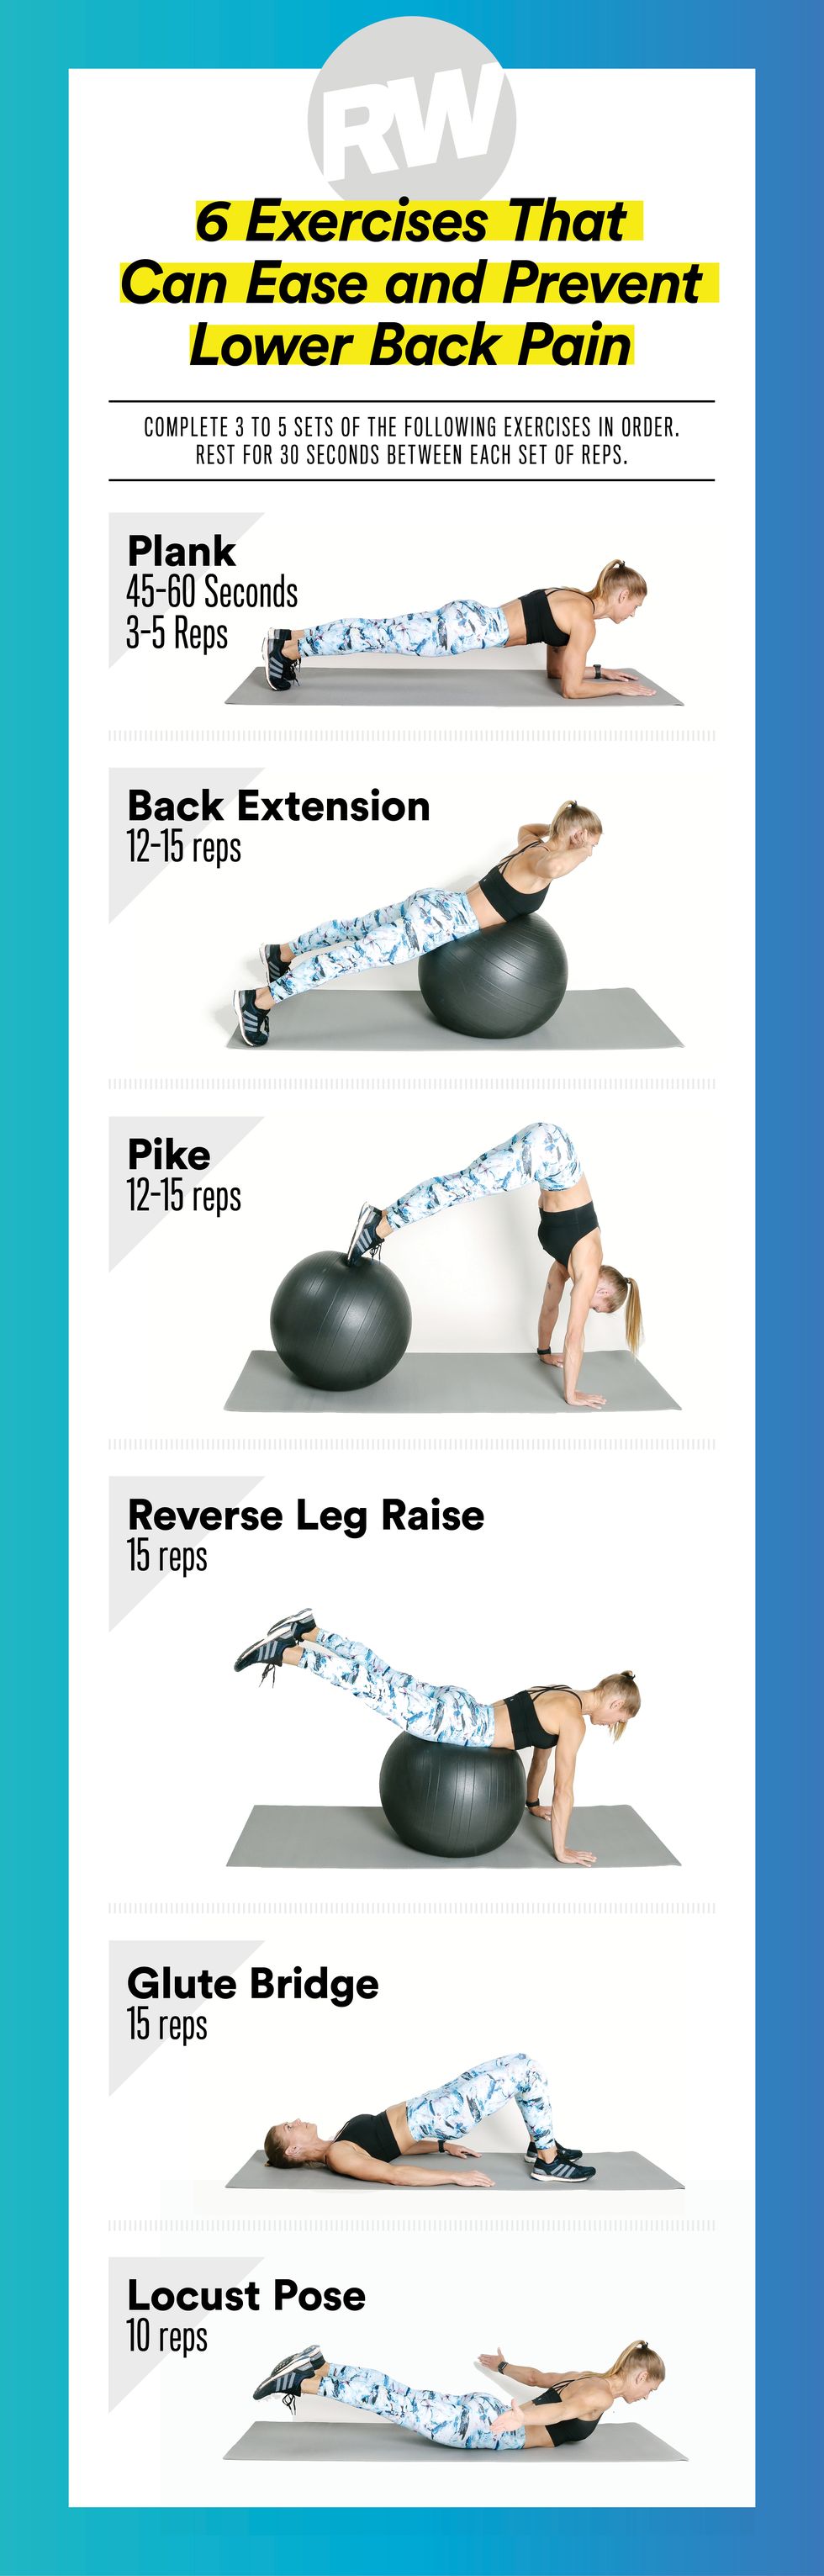 https://hips.hearstapps.com/hmg-prod/images/6-exercises-that-can-ease-and-prevent-lower-back-pain-1539292246.jpg?crop=1xw:1xh;center,top&resize=980:*